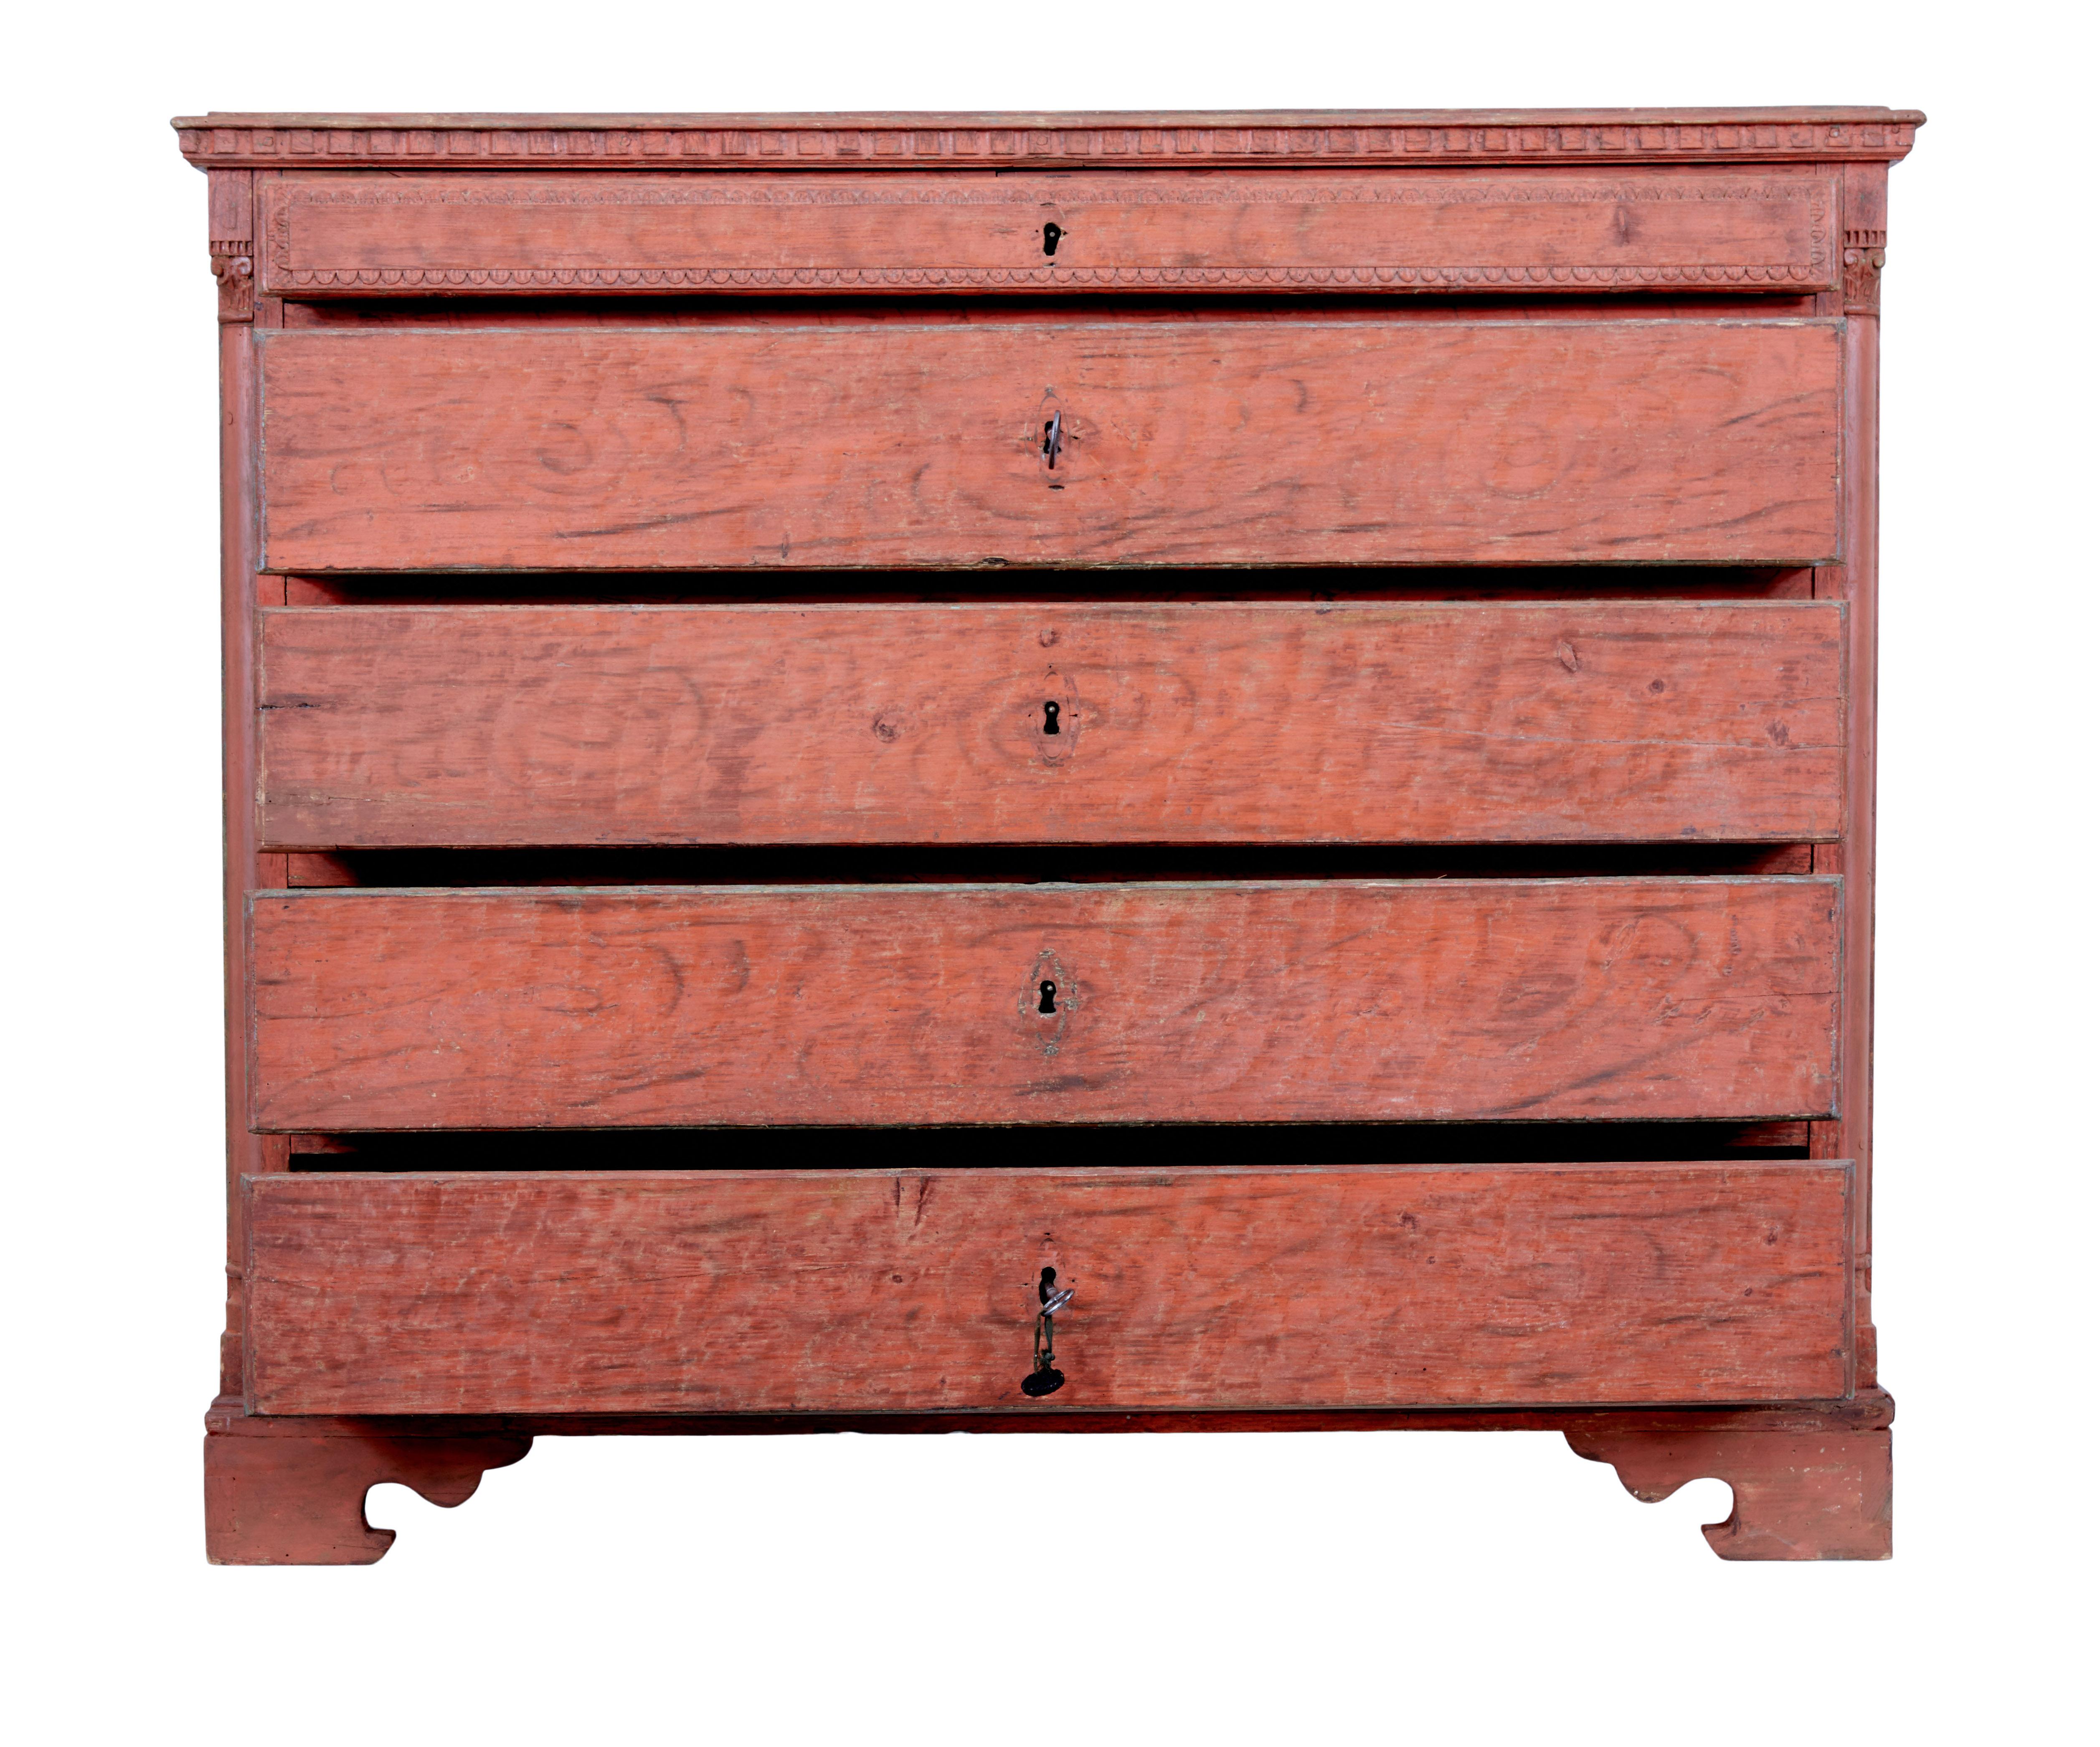 Hand-Carved Late 18th Century Swedish Gustavian Painted Chest of Drawers